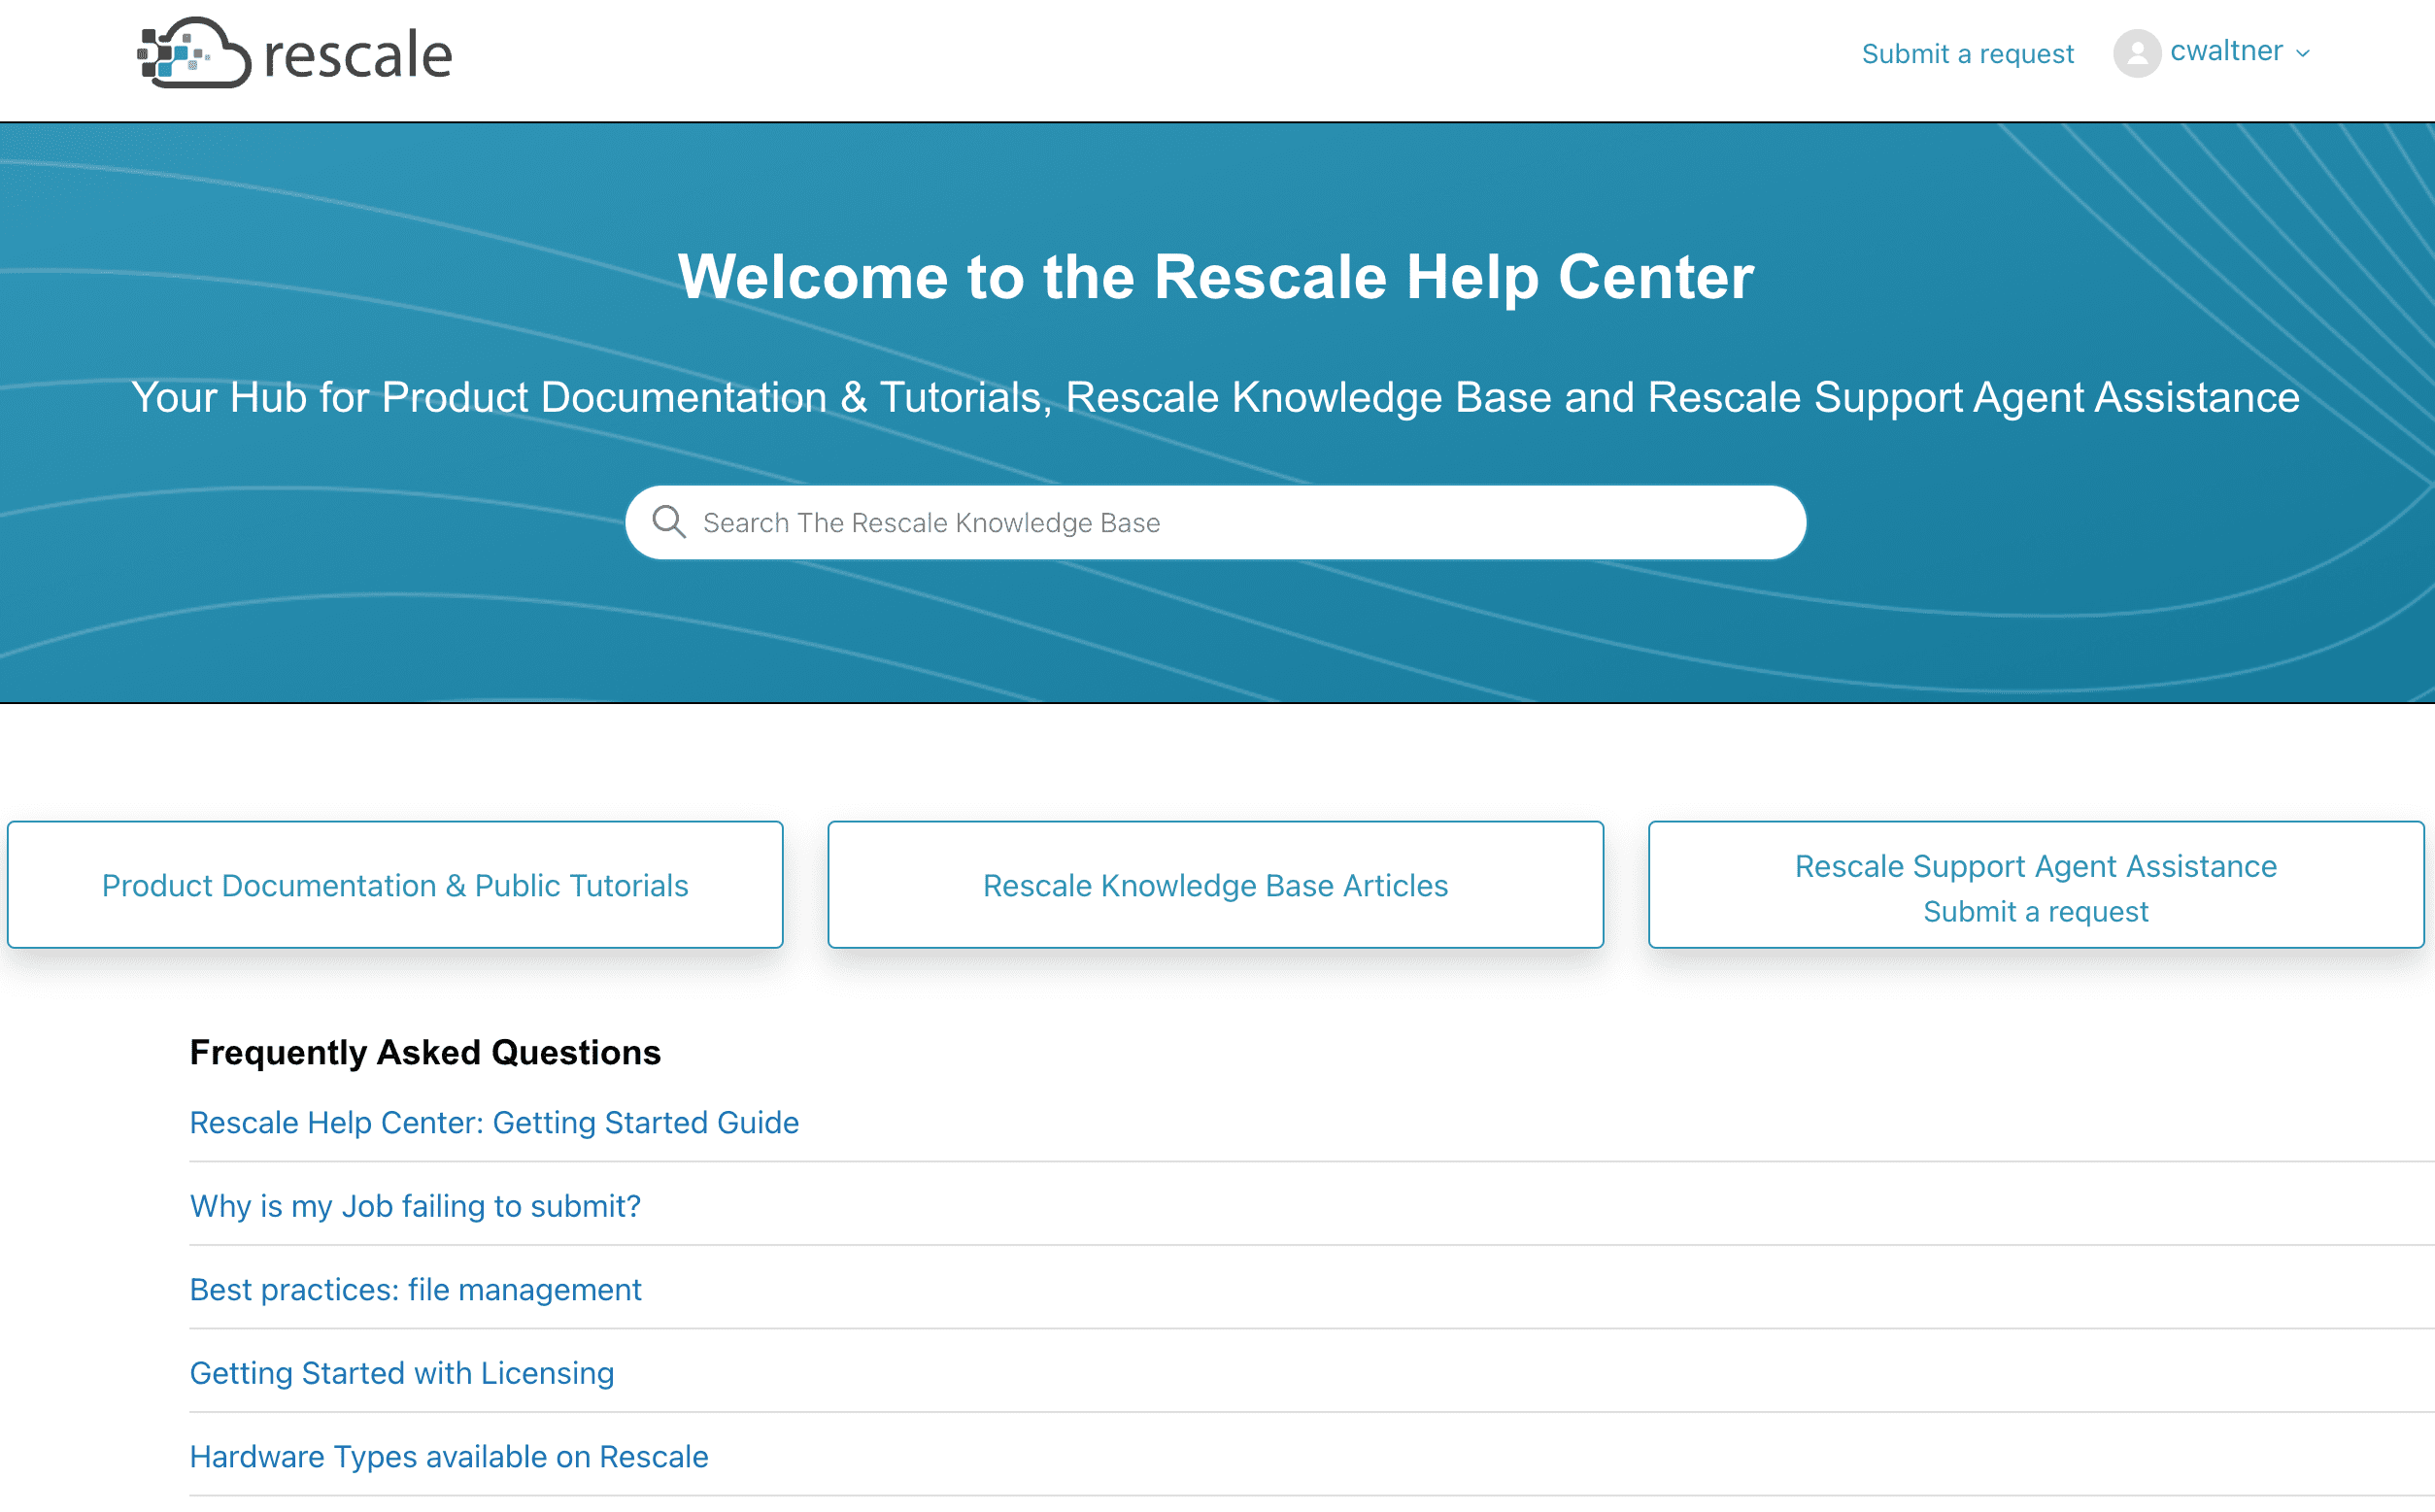 Rescale Help Center home page